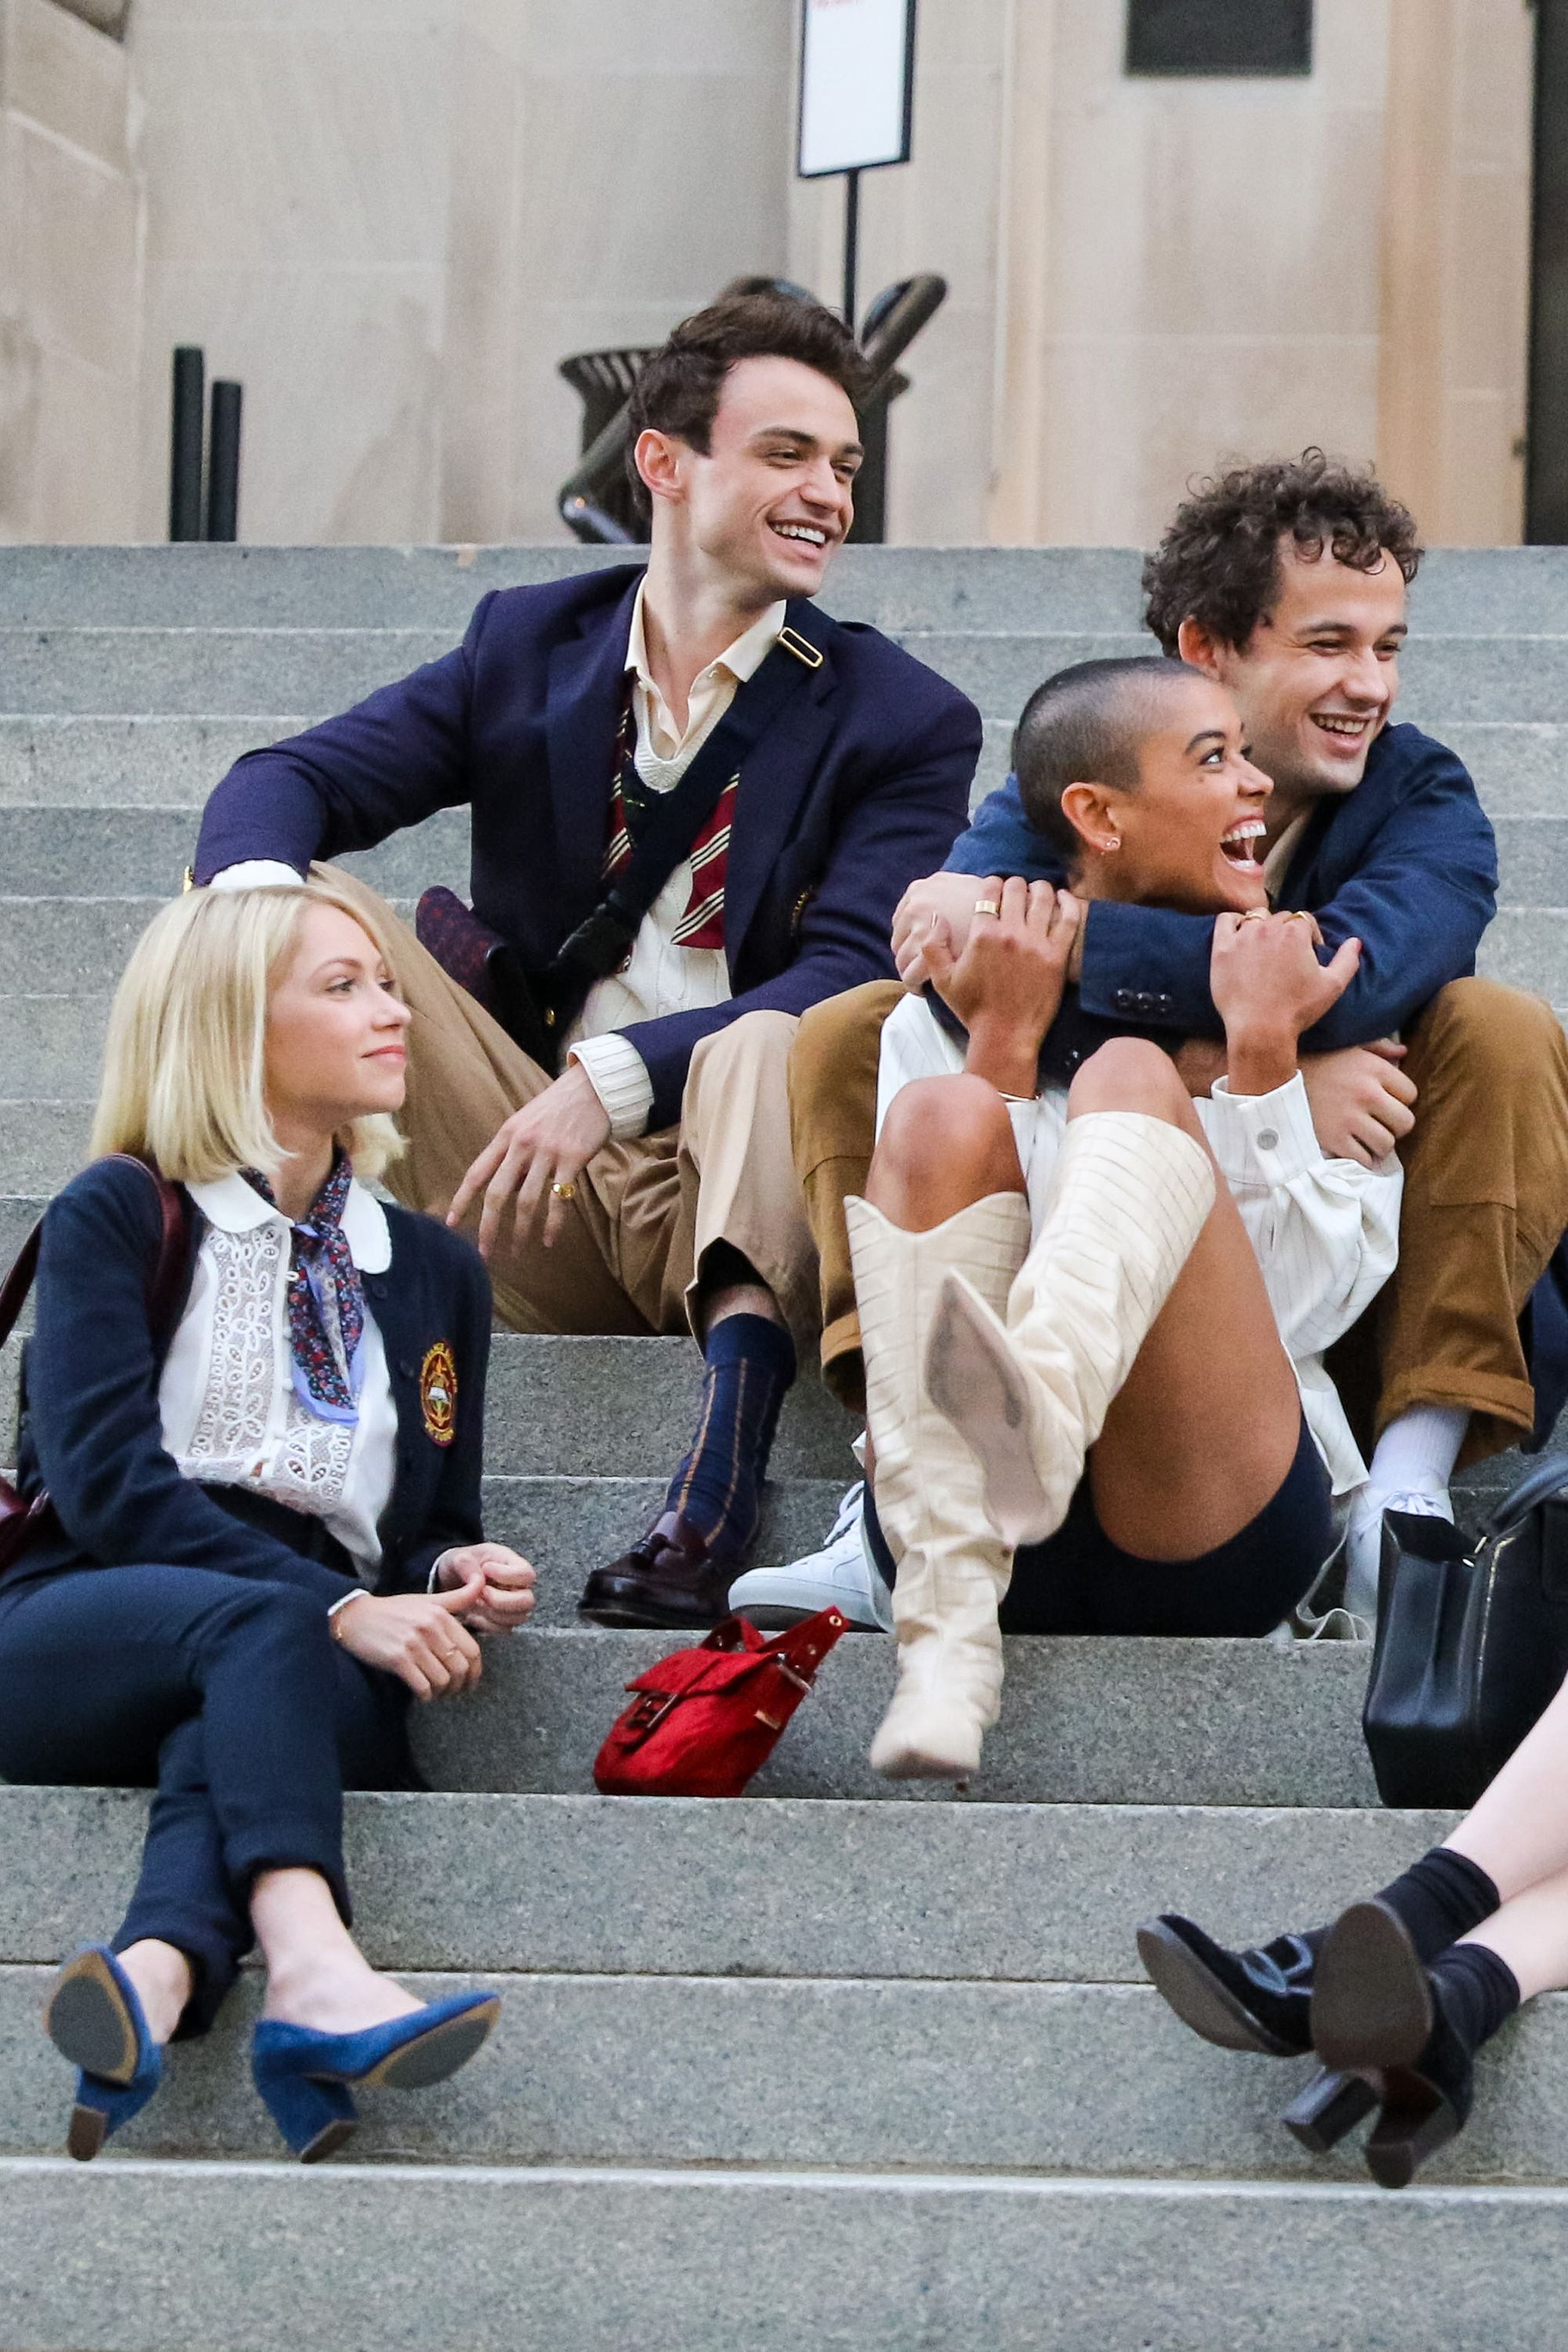 New Behind the Scenes Photos From The 'Gossip Girl' Reboot - 2022